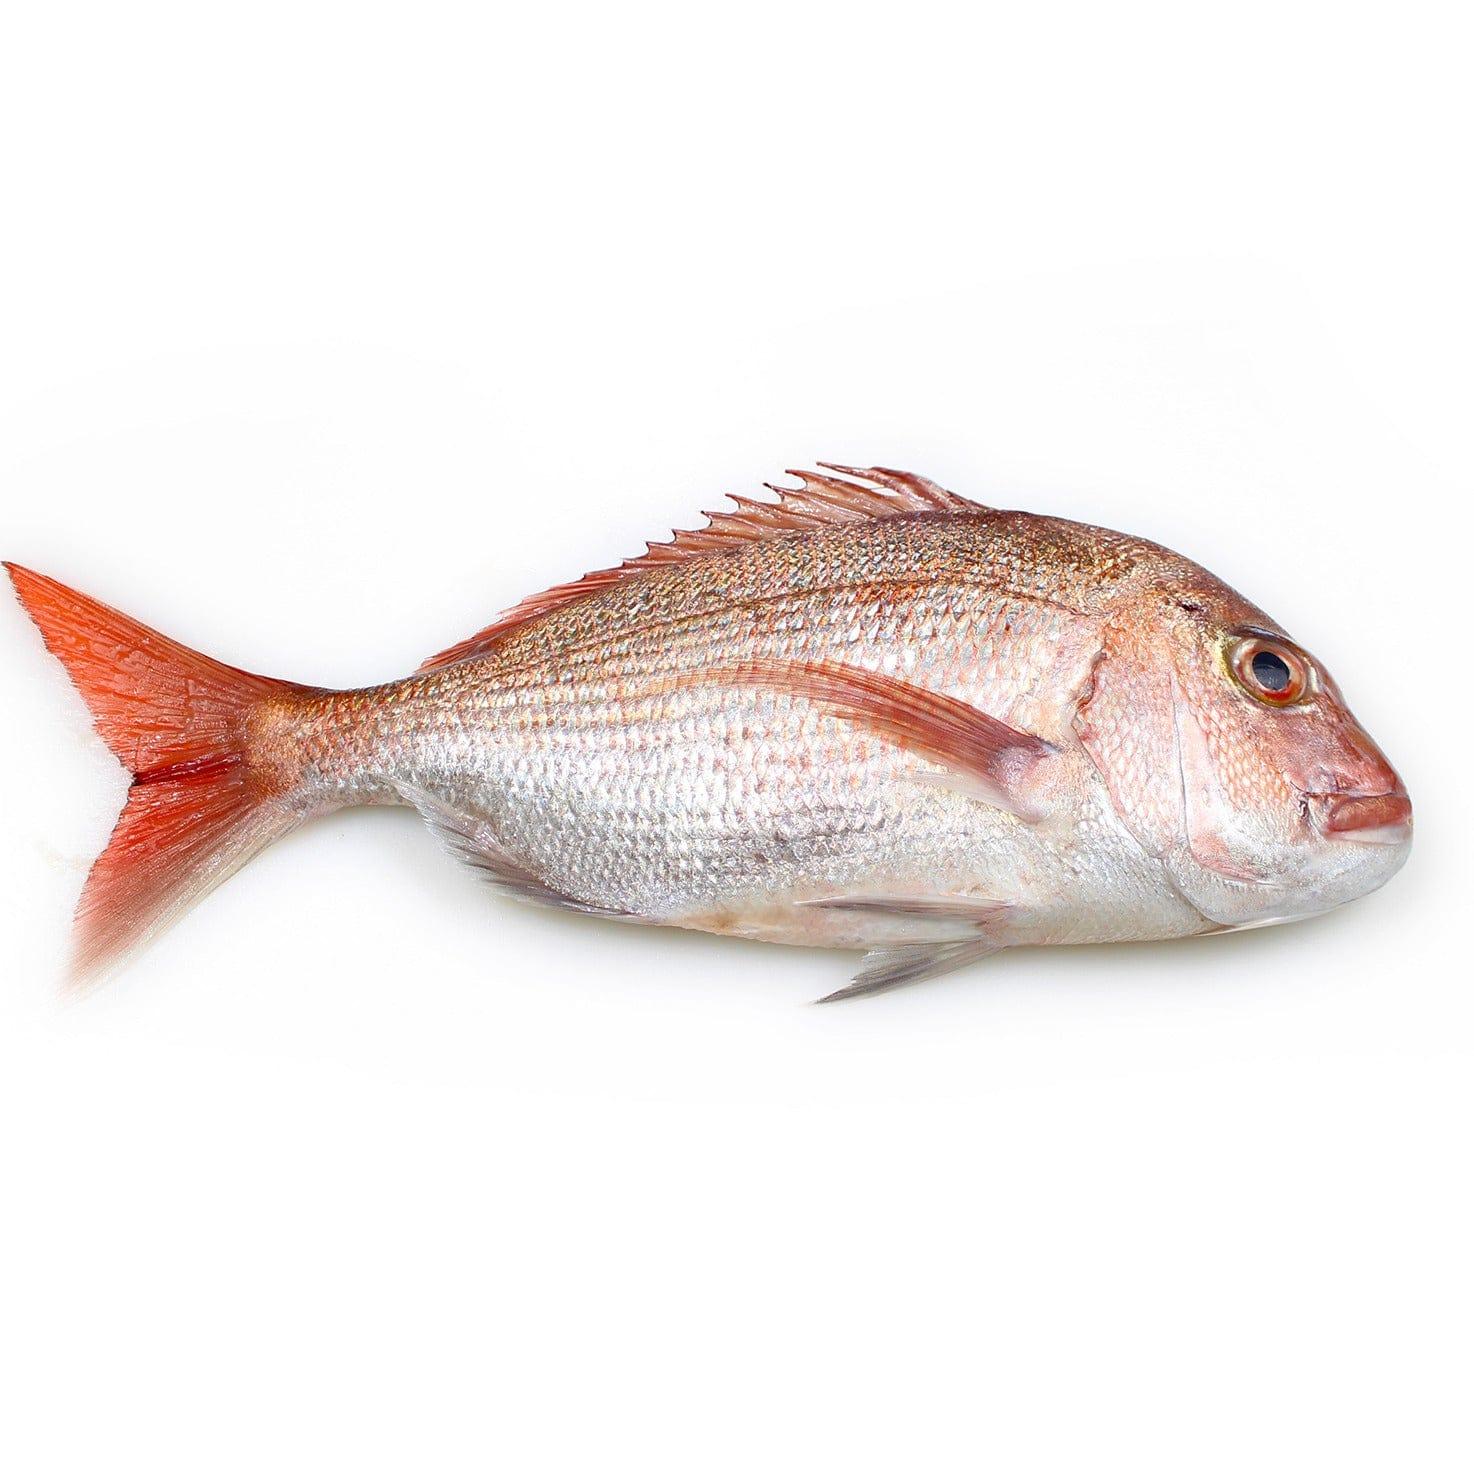 Whole snapper fish from Steve Costi seafood